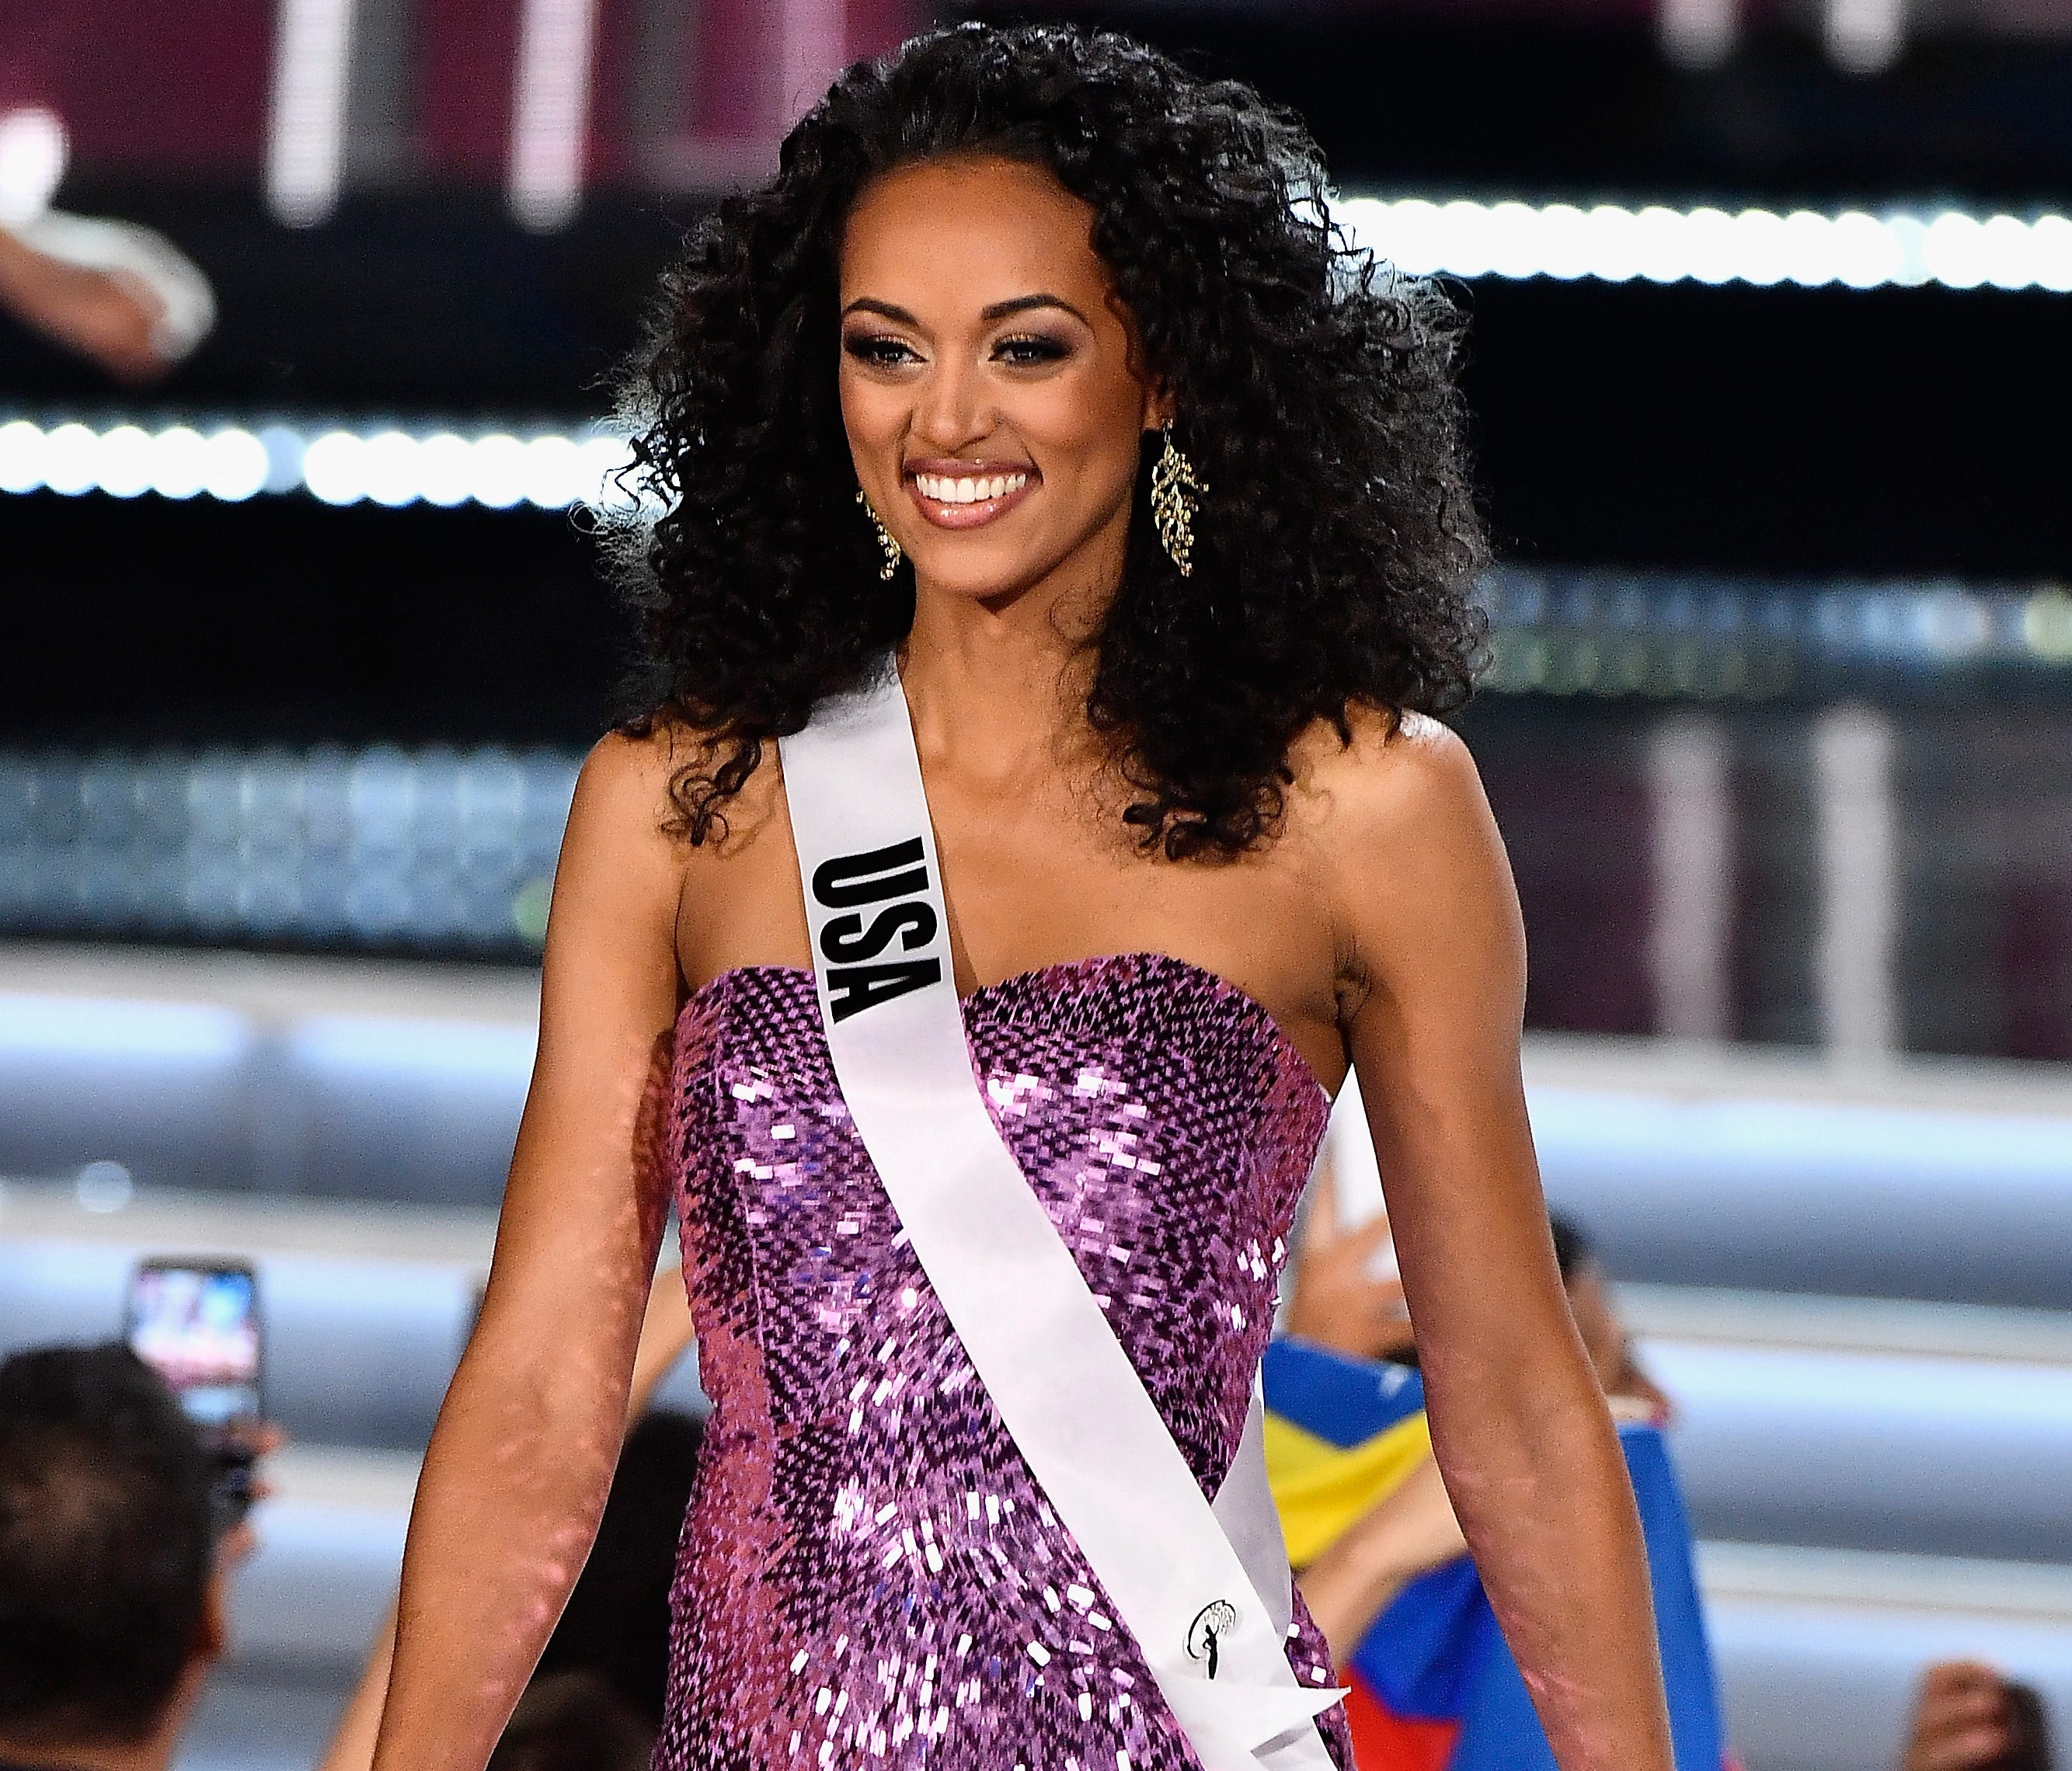 Kara McCullough competes during the Miss Universe Pageant on Nov. 26, 2017 in Las Vegas.